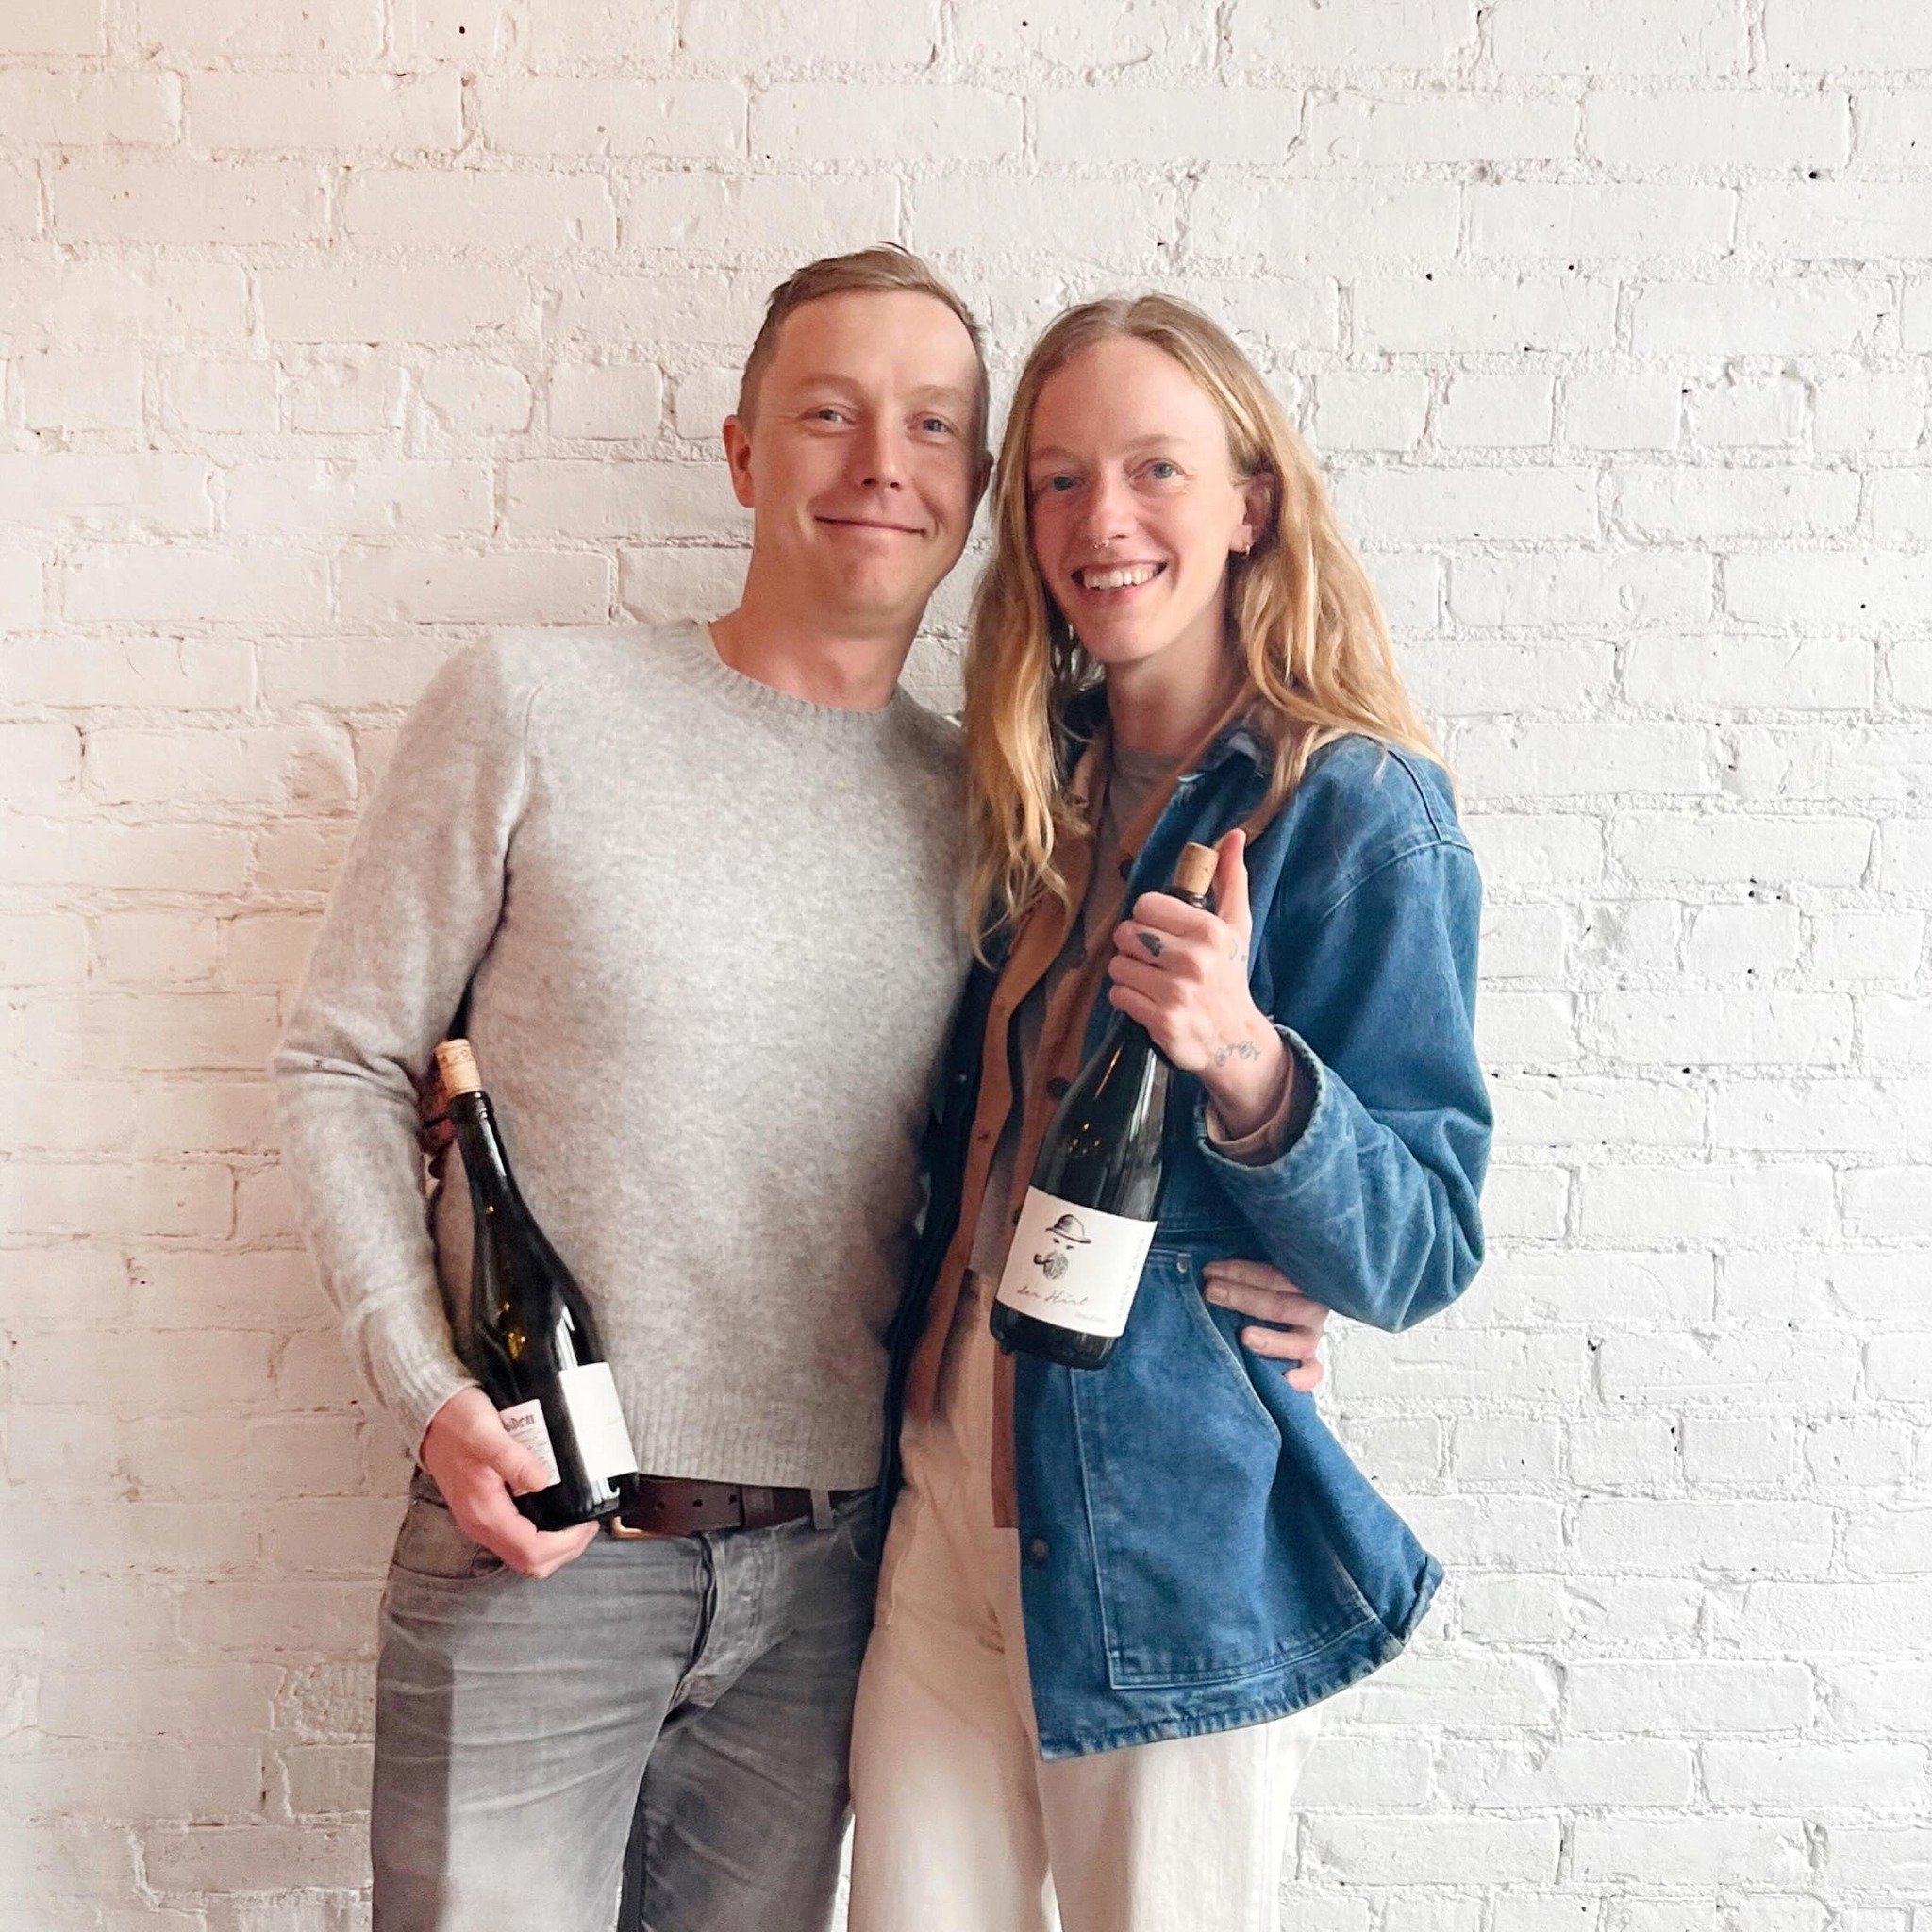 It was an absolute pleasure to meet and taste with Philip and Rosalie of @p.lardot! If you have the time this evening, head over to see our friends @chleo.kingston for a stellar glass of skin contact Pinot Gris or one of their delightfully complex Ri